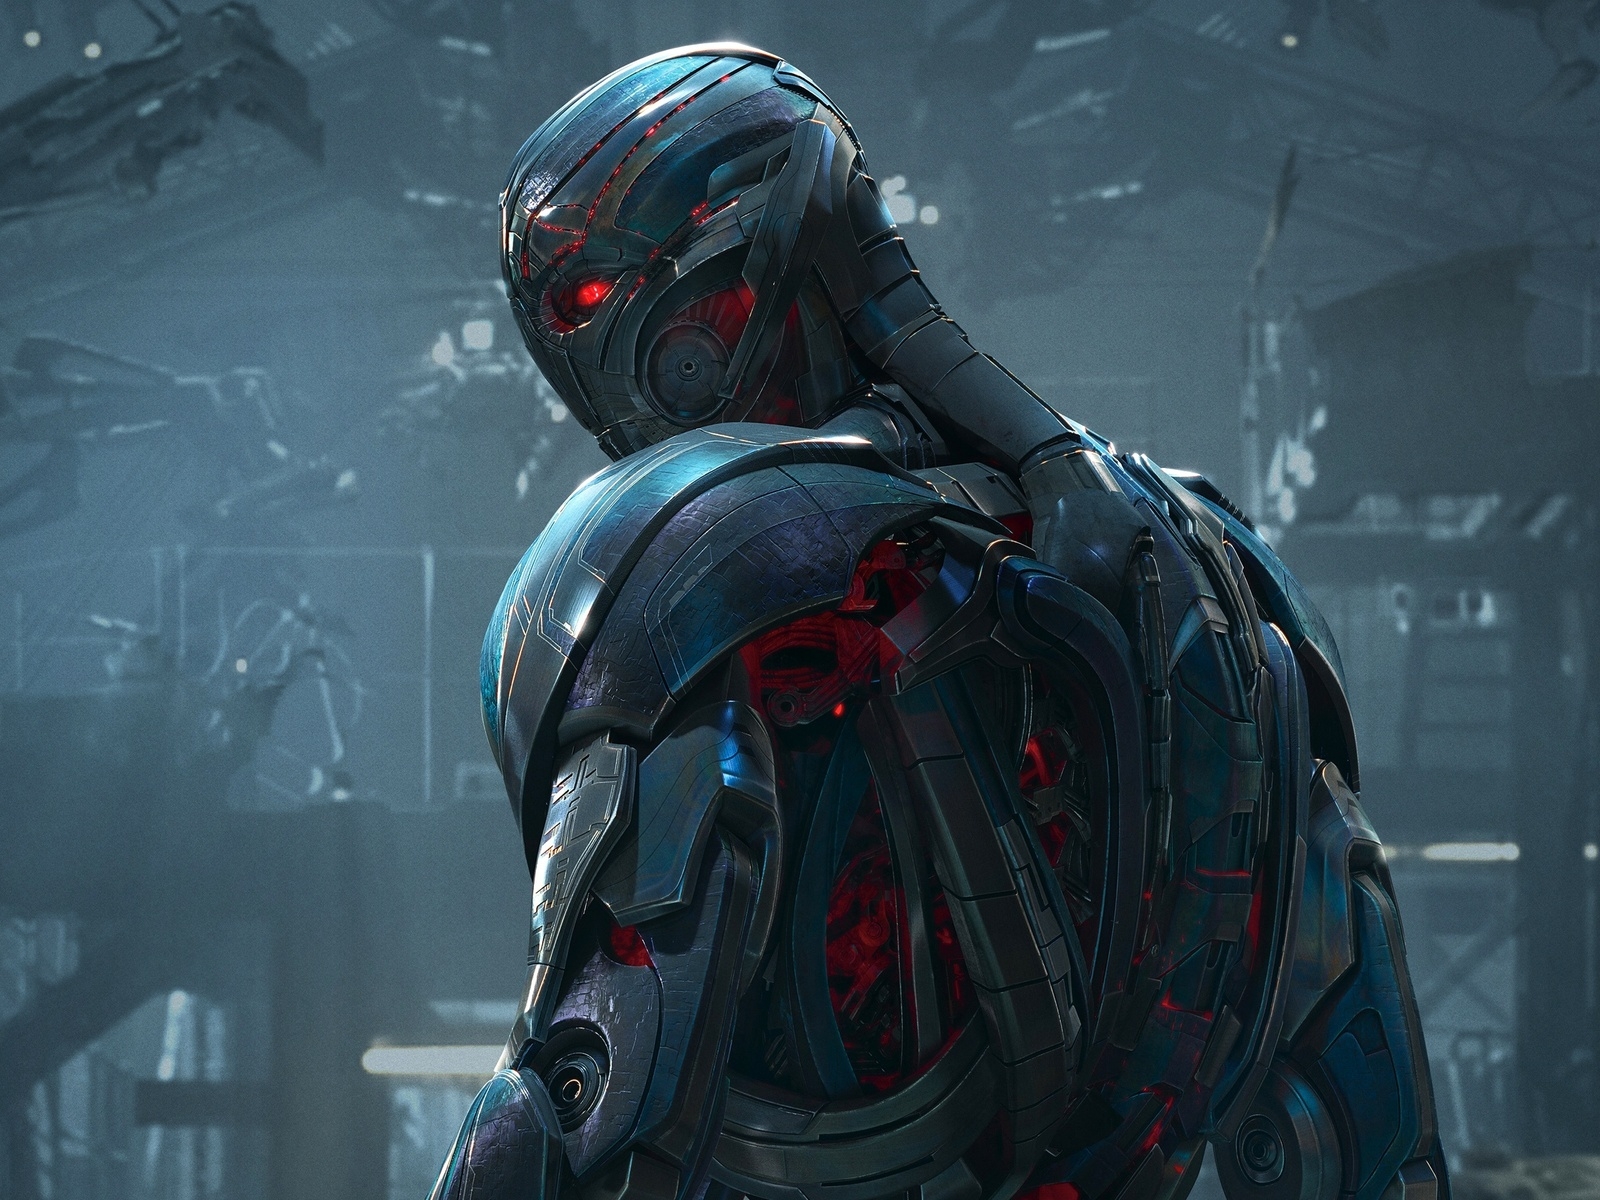 Ultron from Avengers for 1600 x 1200 resolution